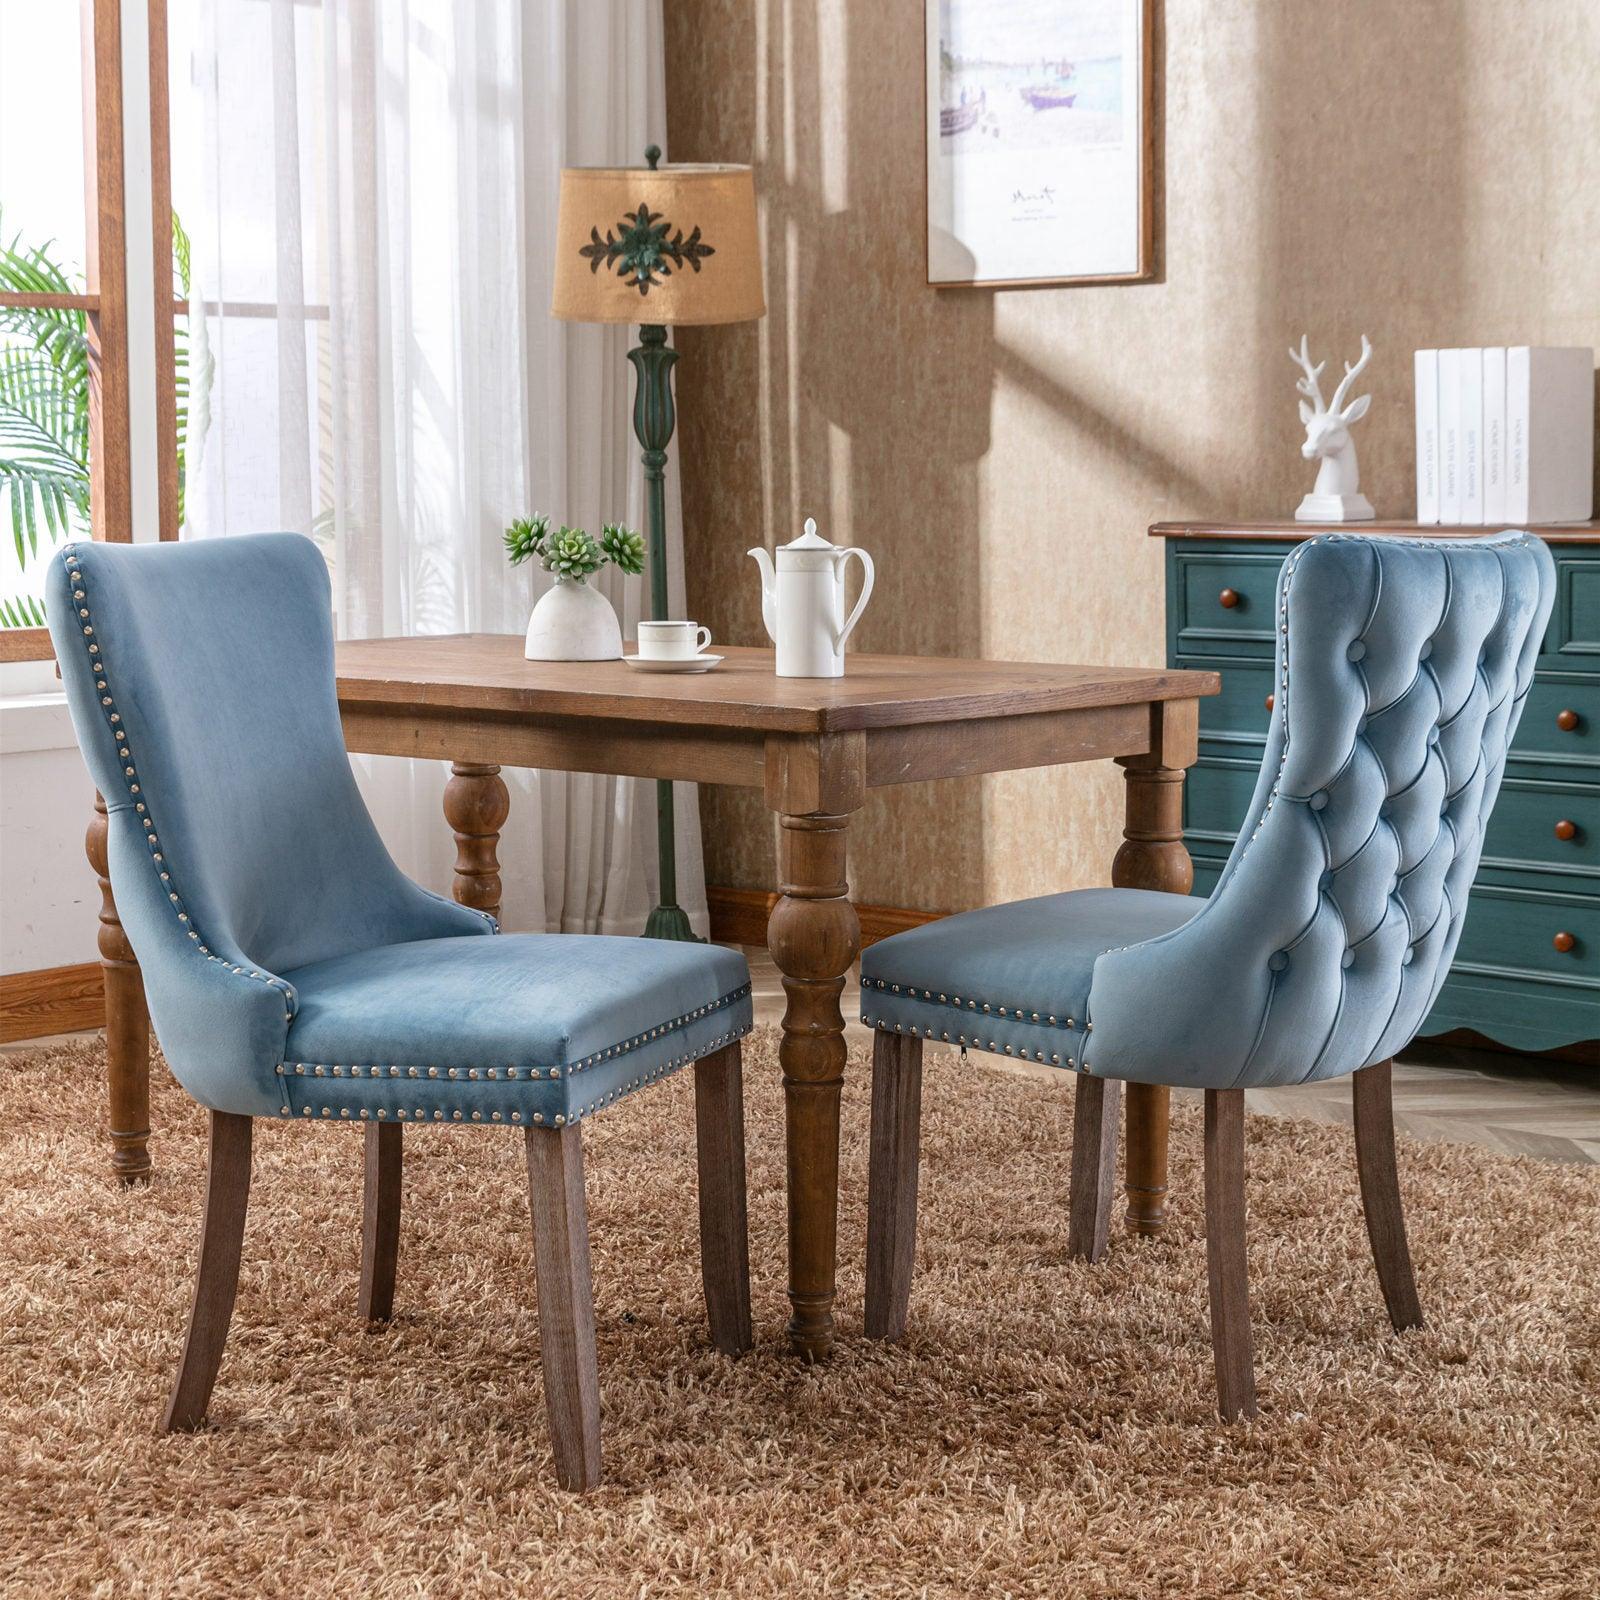 🆓🚛 Upholstered Wing-Back Dining Chair With Backstitching Nailhead Trim & Solid Wood Legs, Set Of 2, Light Blue